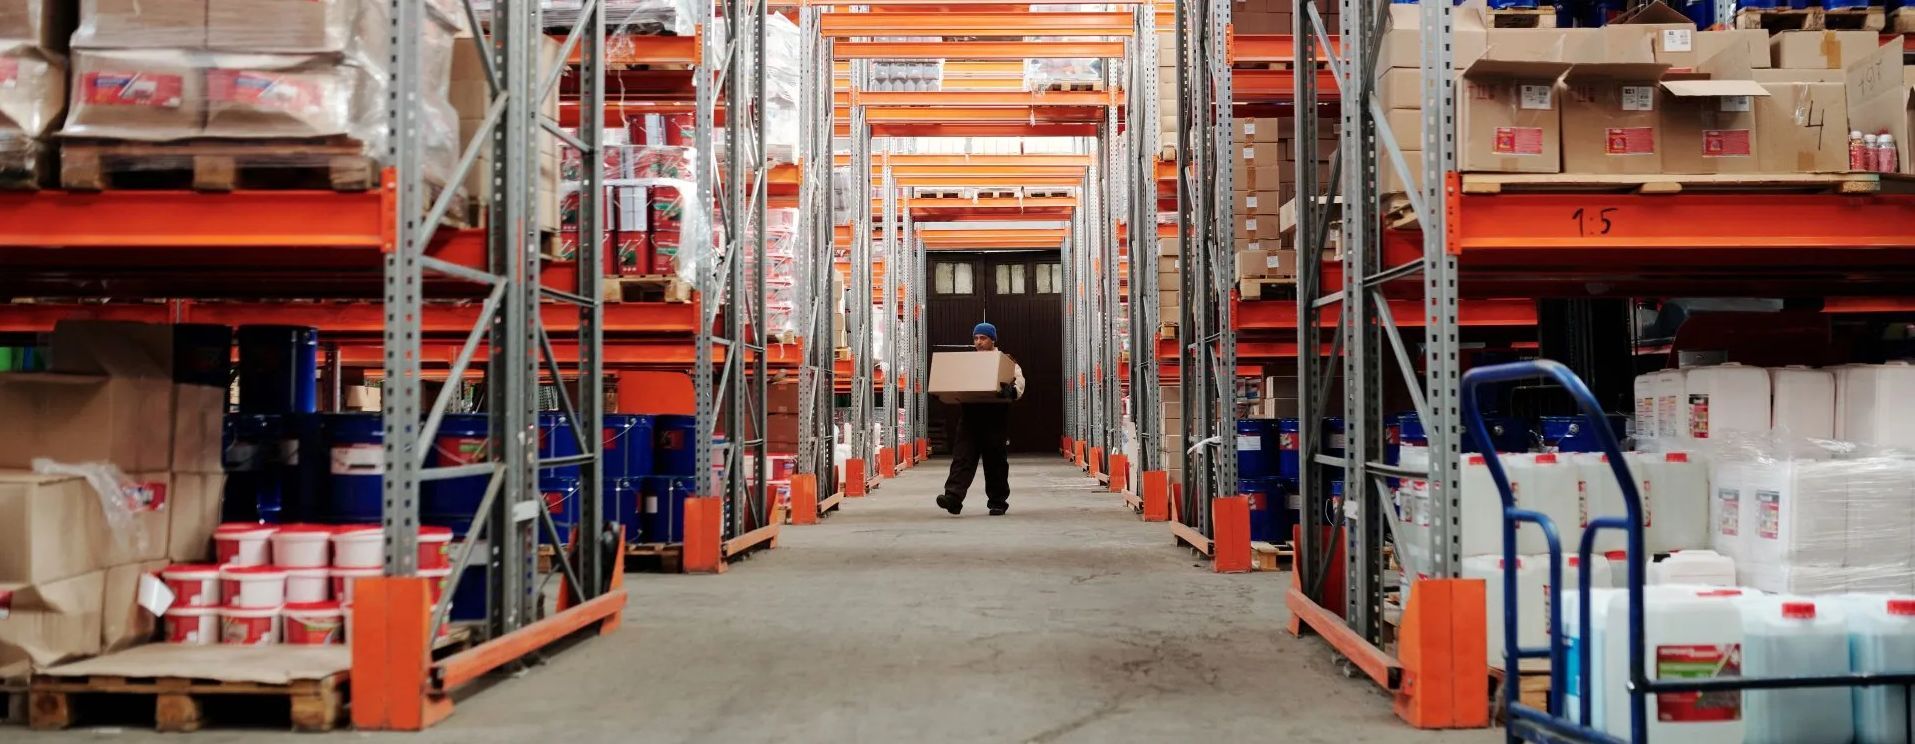 This is an image of a man in a warehouse for wholesale distributors. The man is carrying a box through shelves of products.